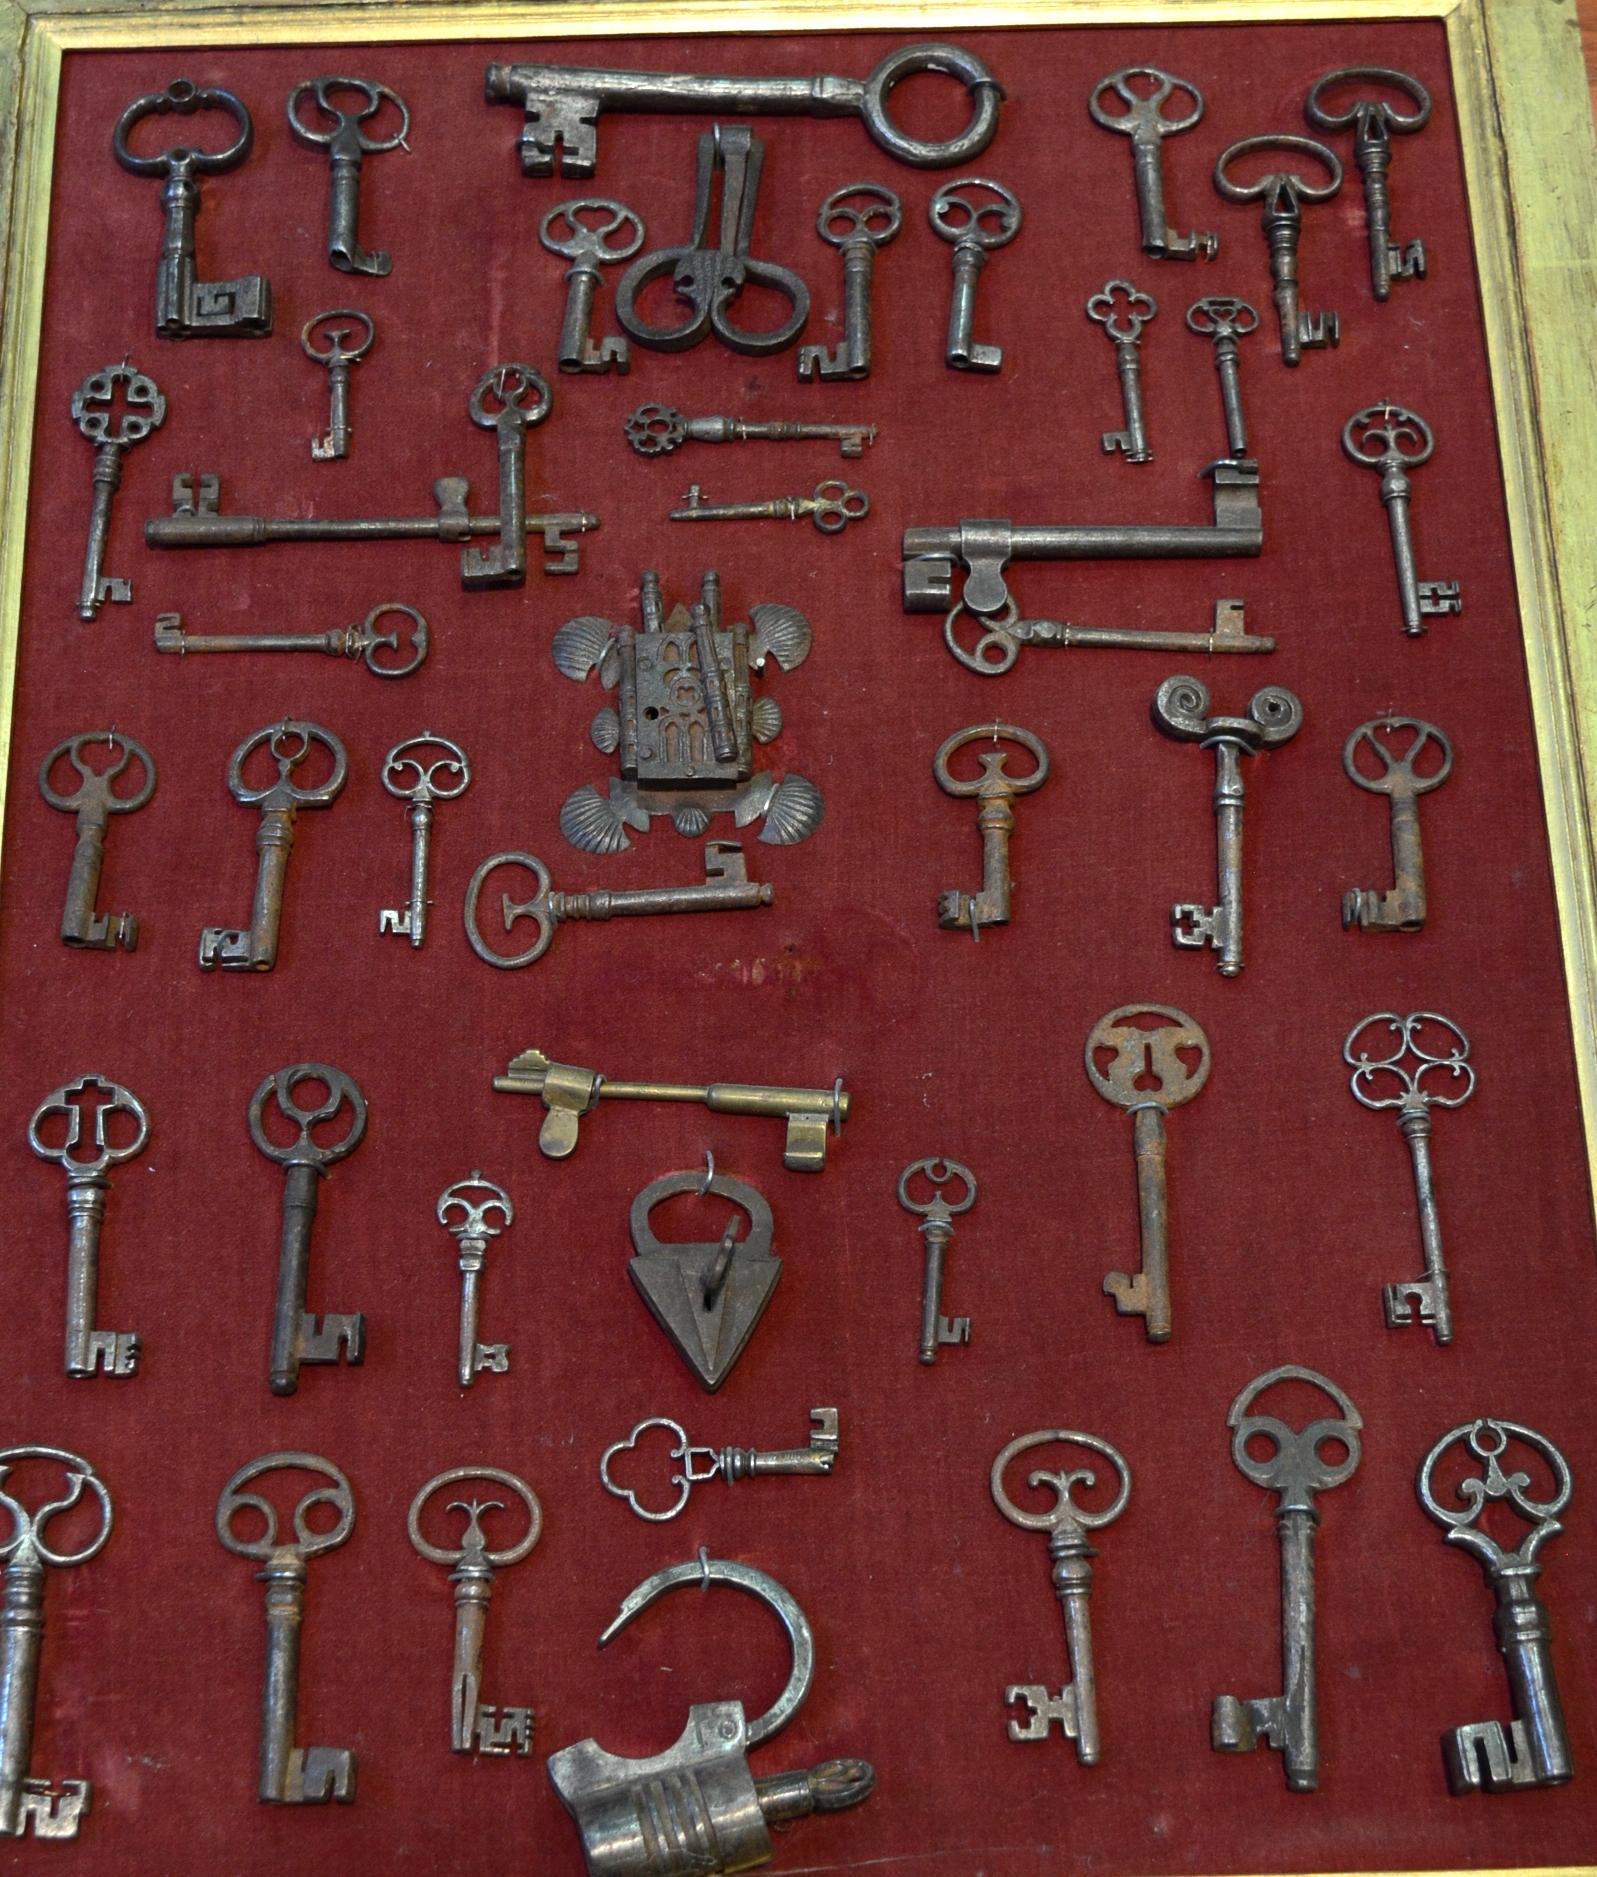 Collection consisting of more than 40 keys of different sizes, to which are added several ironworks and two ancient padlocks, all made in wrought iron, with some pieces retaining their original patina. It is essential to highlight the great variety